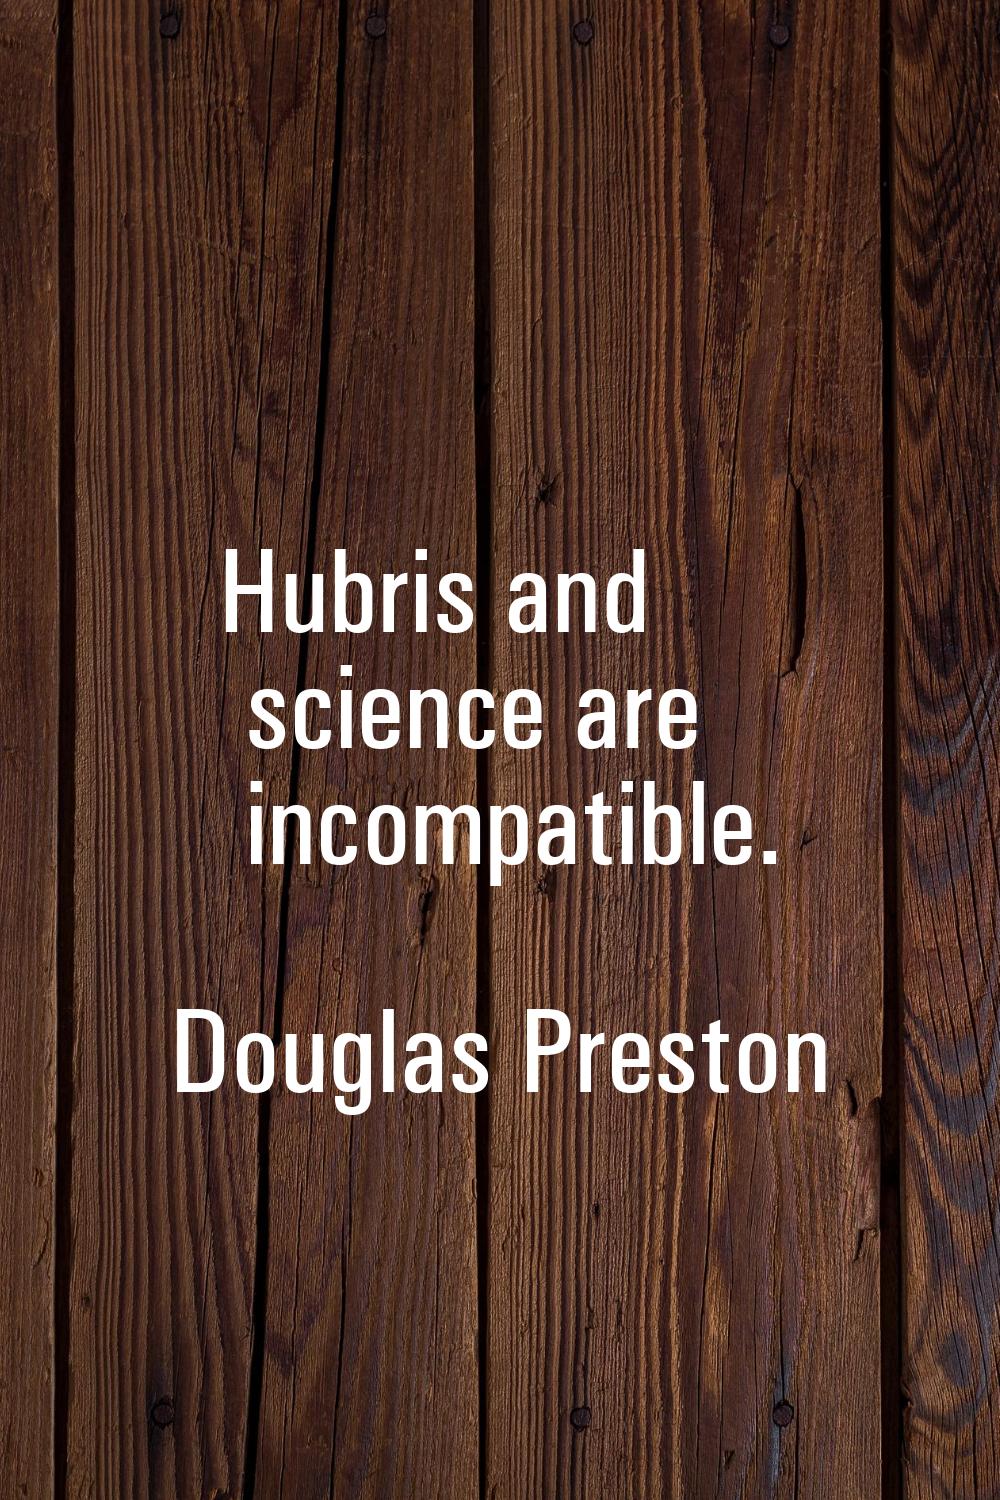 Hubris and science are incompatible.